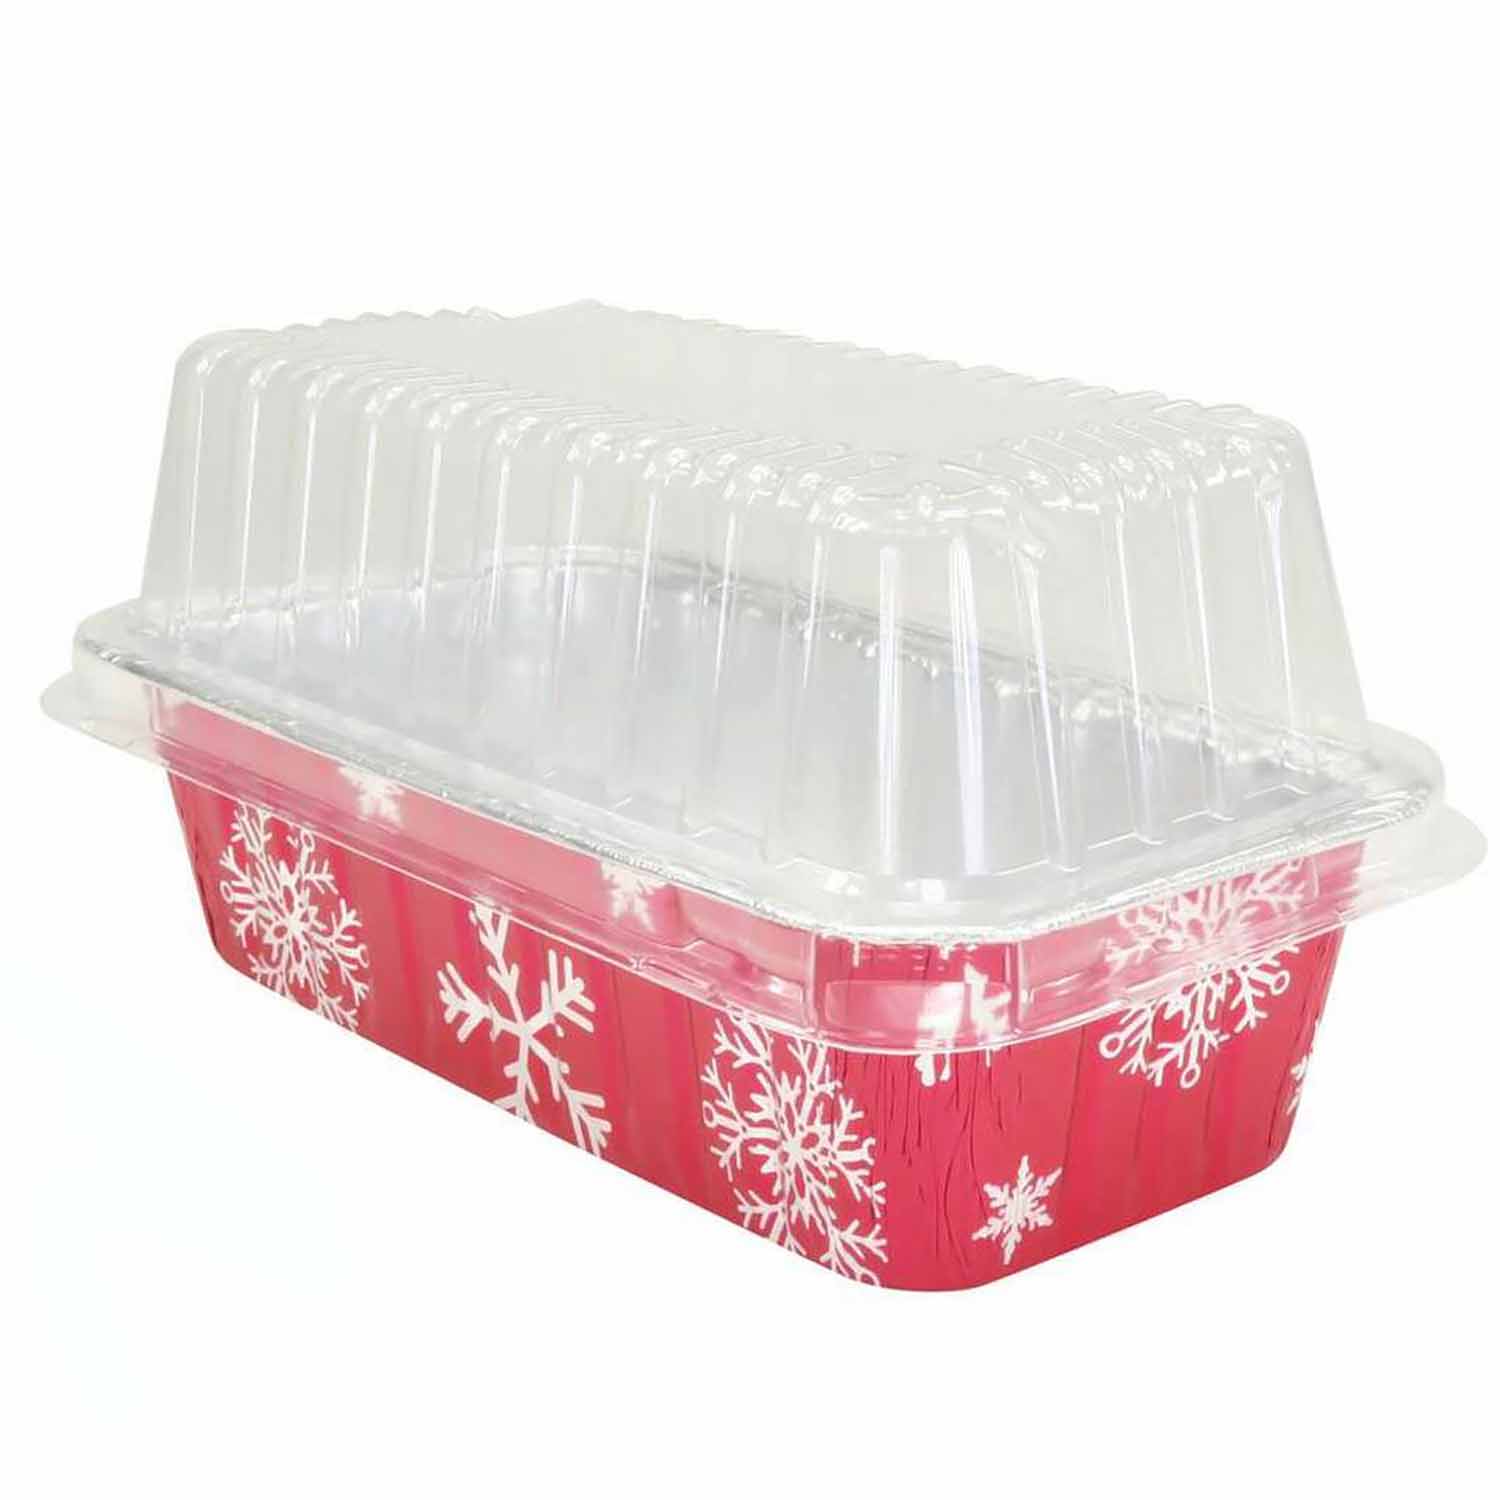 2 lb Snowflake Foil Loaf Pan with Dome Lid - Country Kitchen